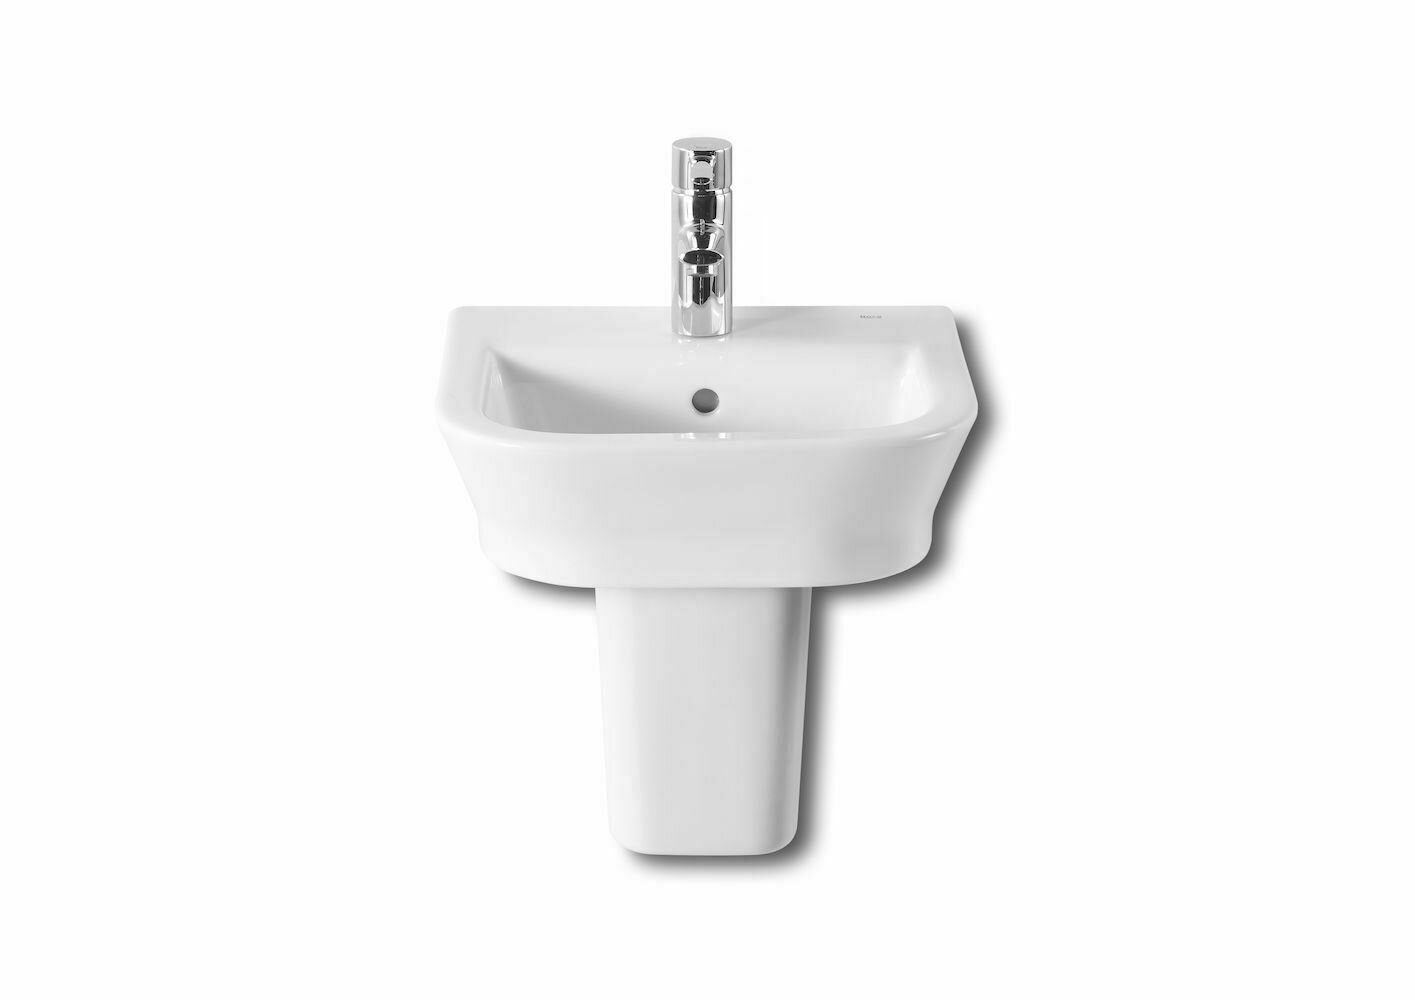 Roca The Gap Cloakroom or Countertop Basin ONLY 400 x 320mm 1TH A327478000